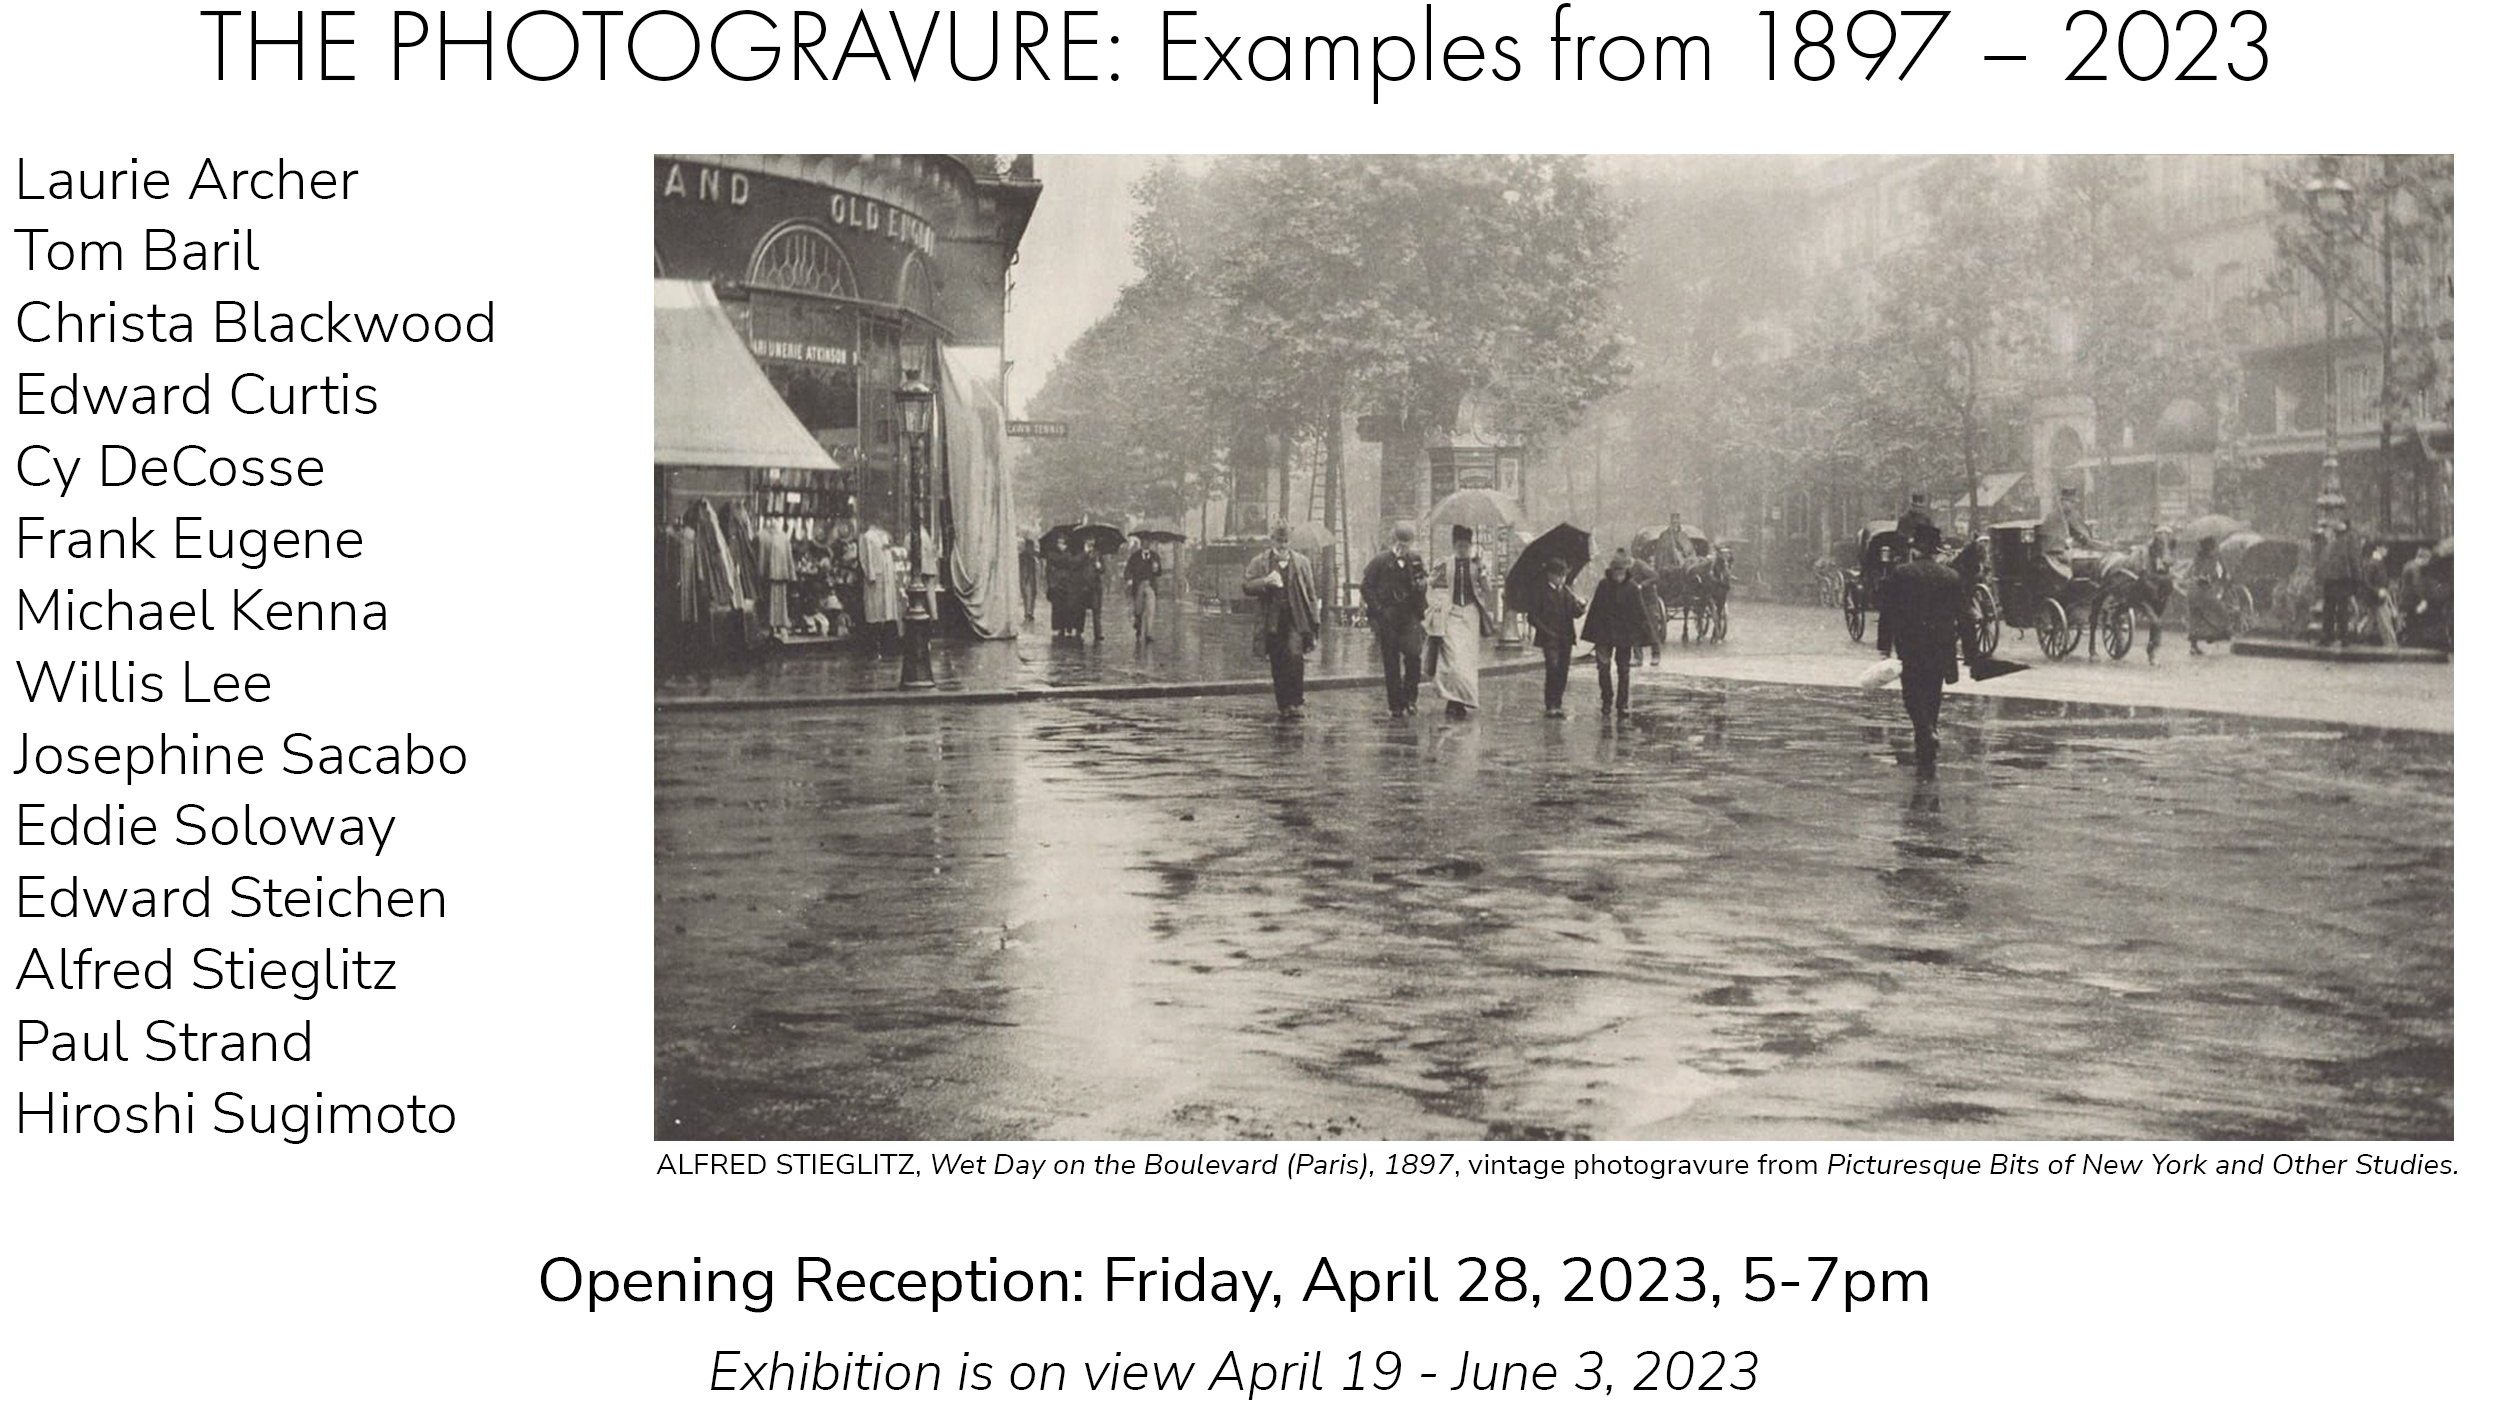 The Photogravure: Examples from 1897 - 2023, opening reception Friday April 28, 2023 from 5-7pm. Exhibition is on view April 19 - June 3, 2023.